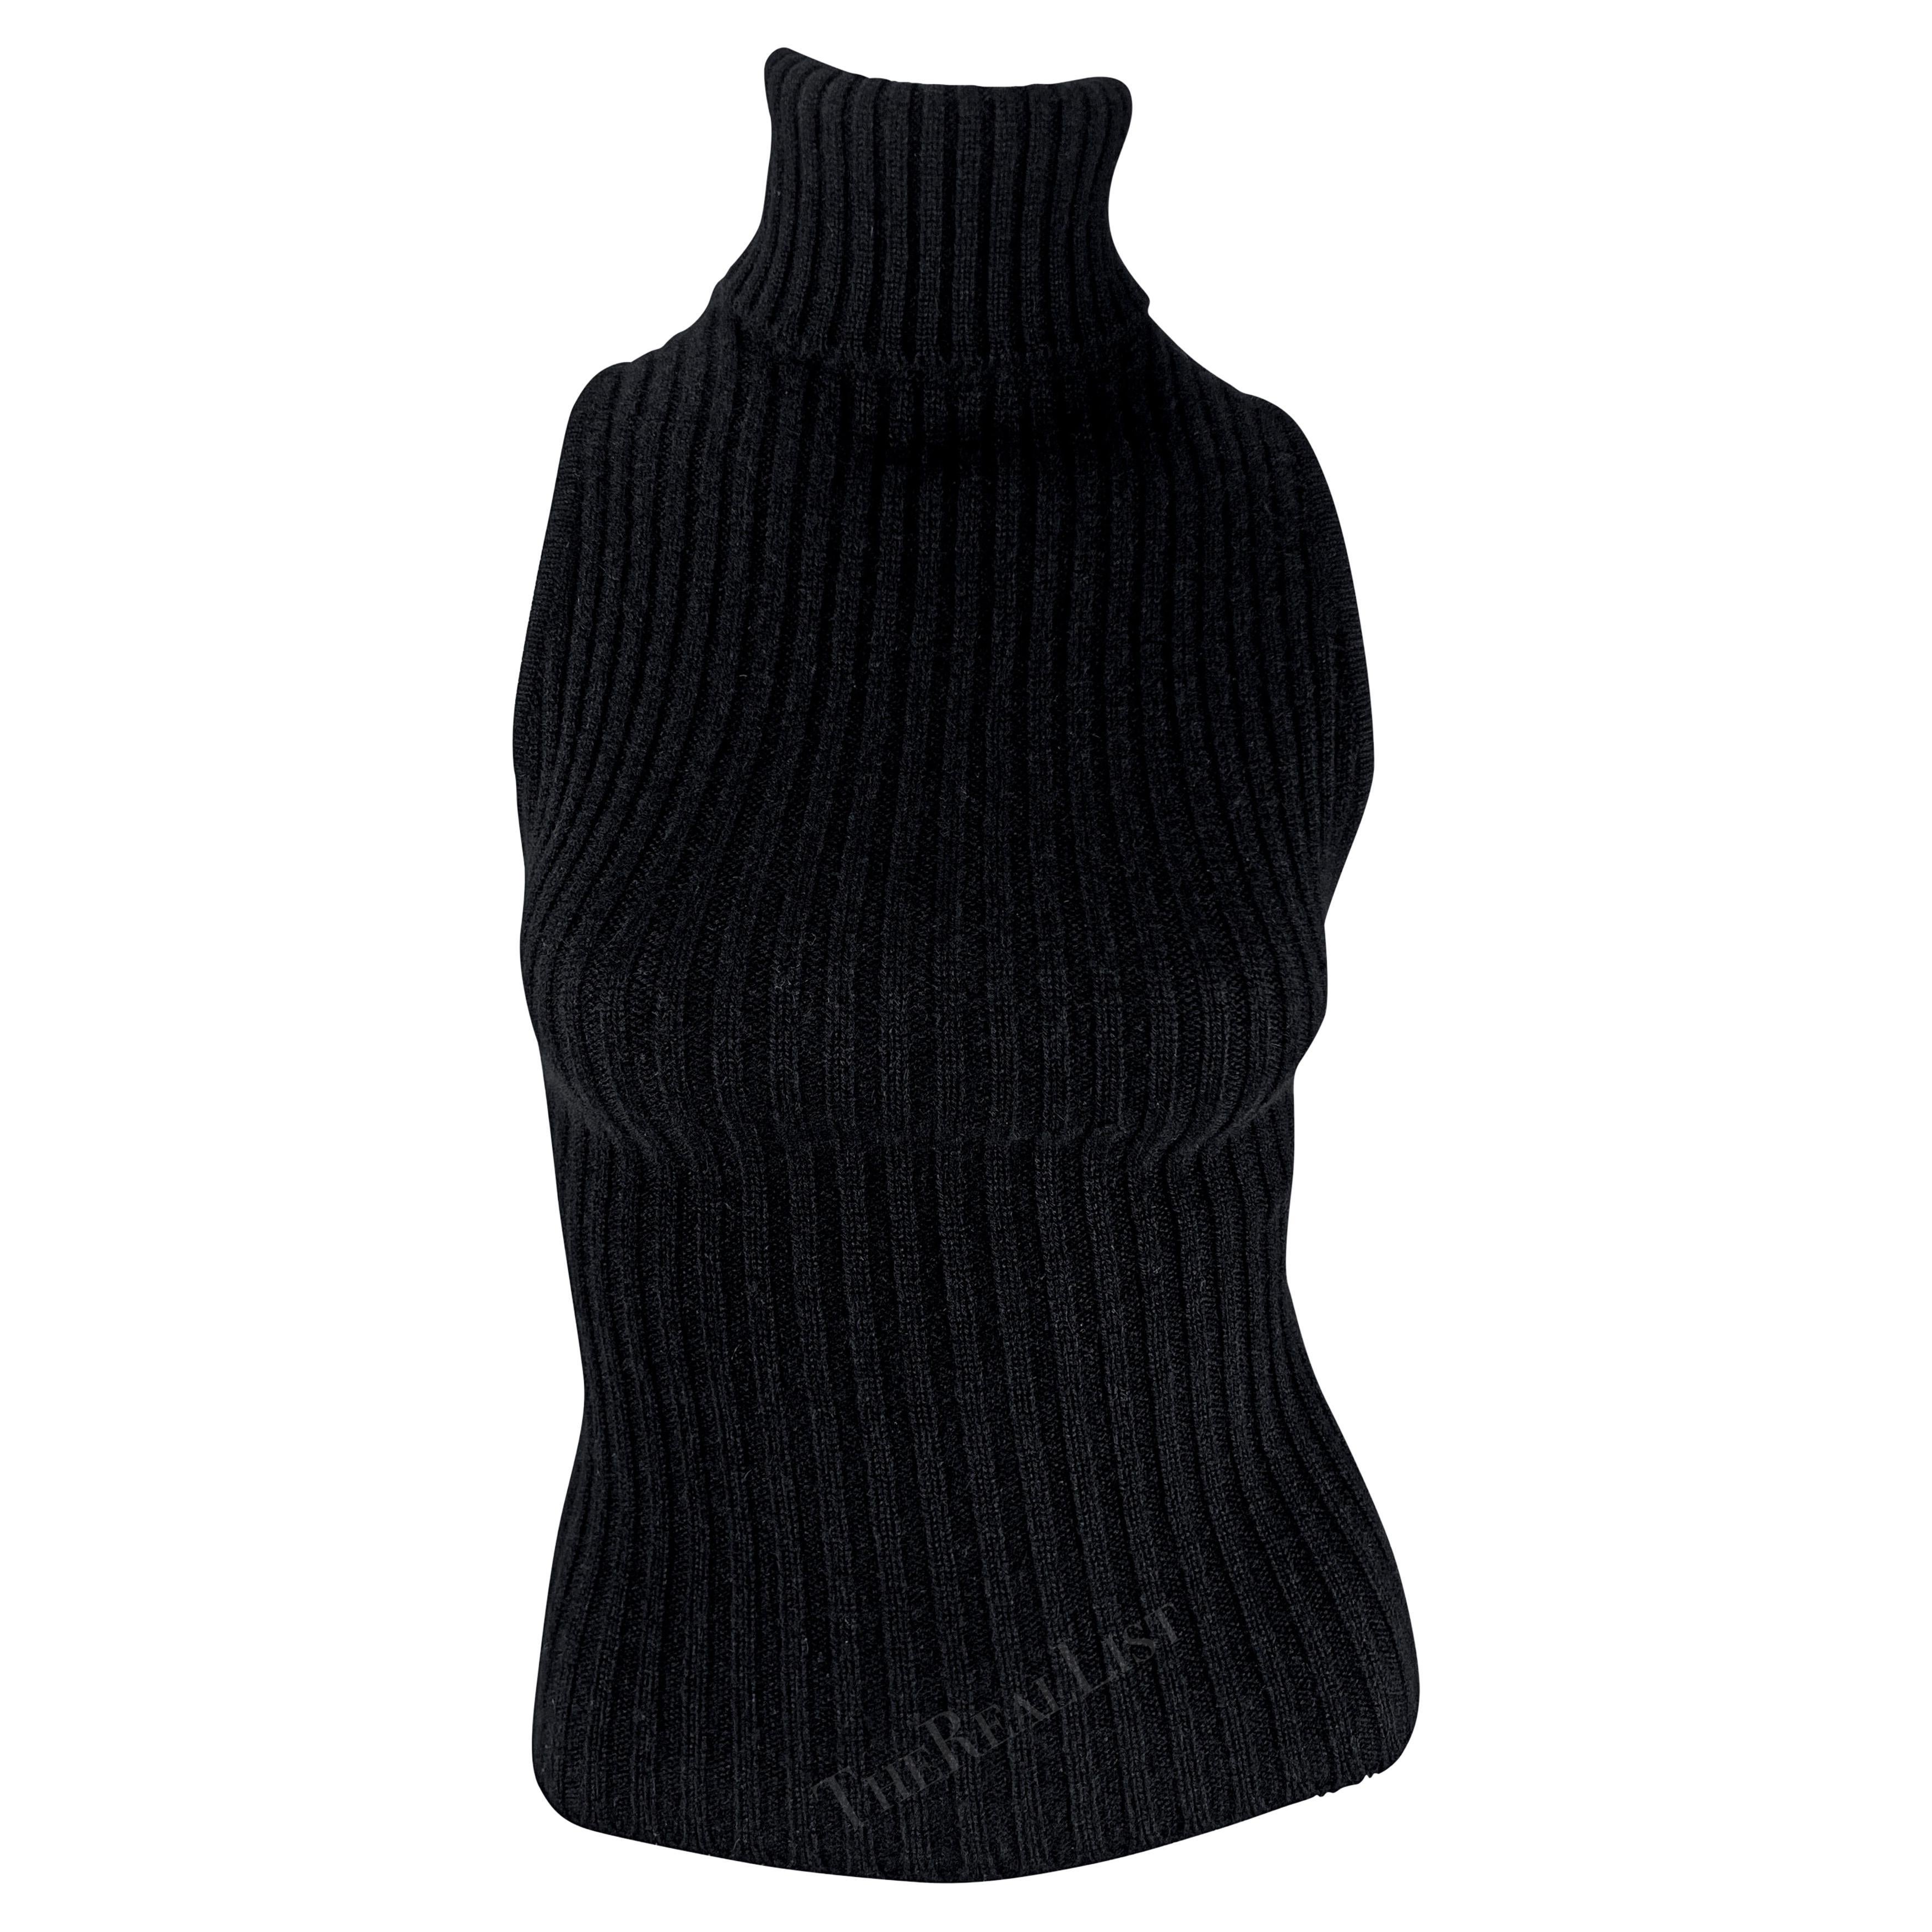 Late 1990s Gucci by Tom Ford Black Cashmere Backless Turtleneck Top 1